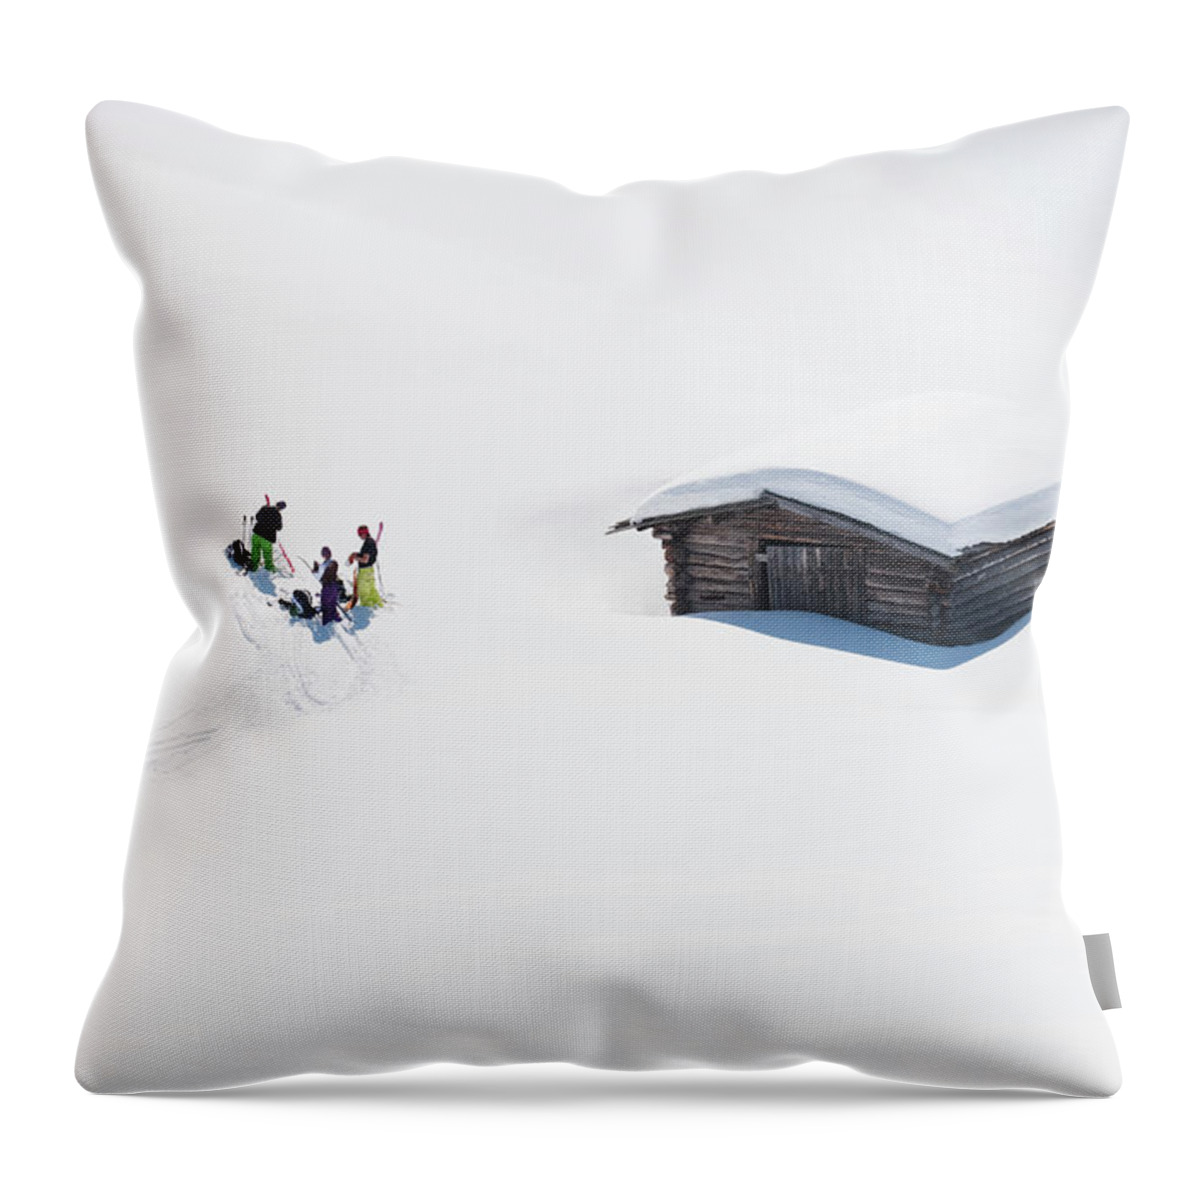 Skiing Throw Pillow featuring the photograph Italy, Trentino-alto Adige, Alto Adige by Westend61